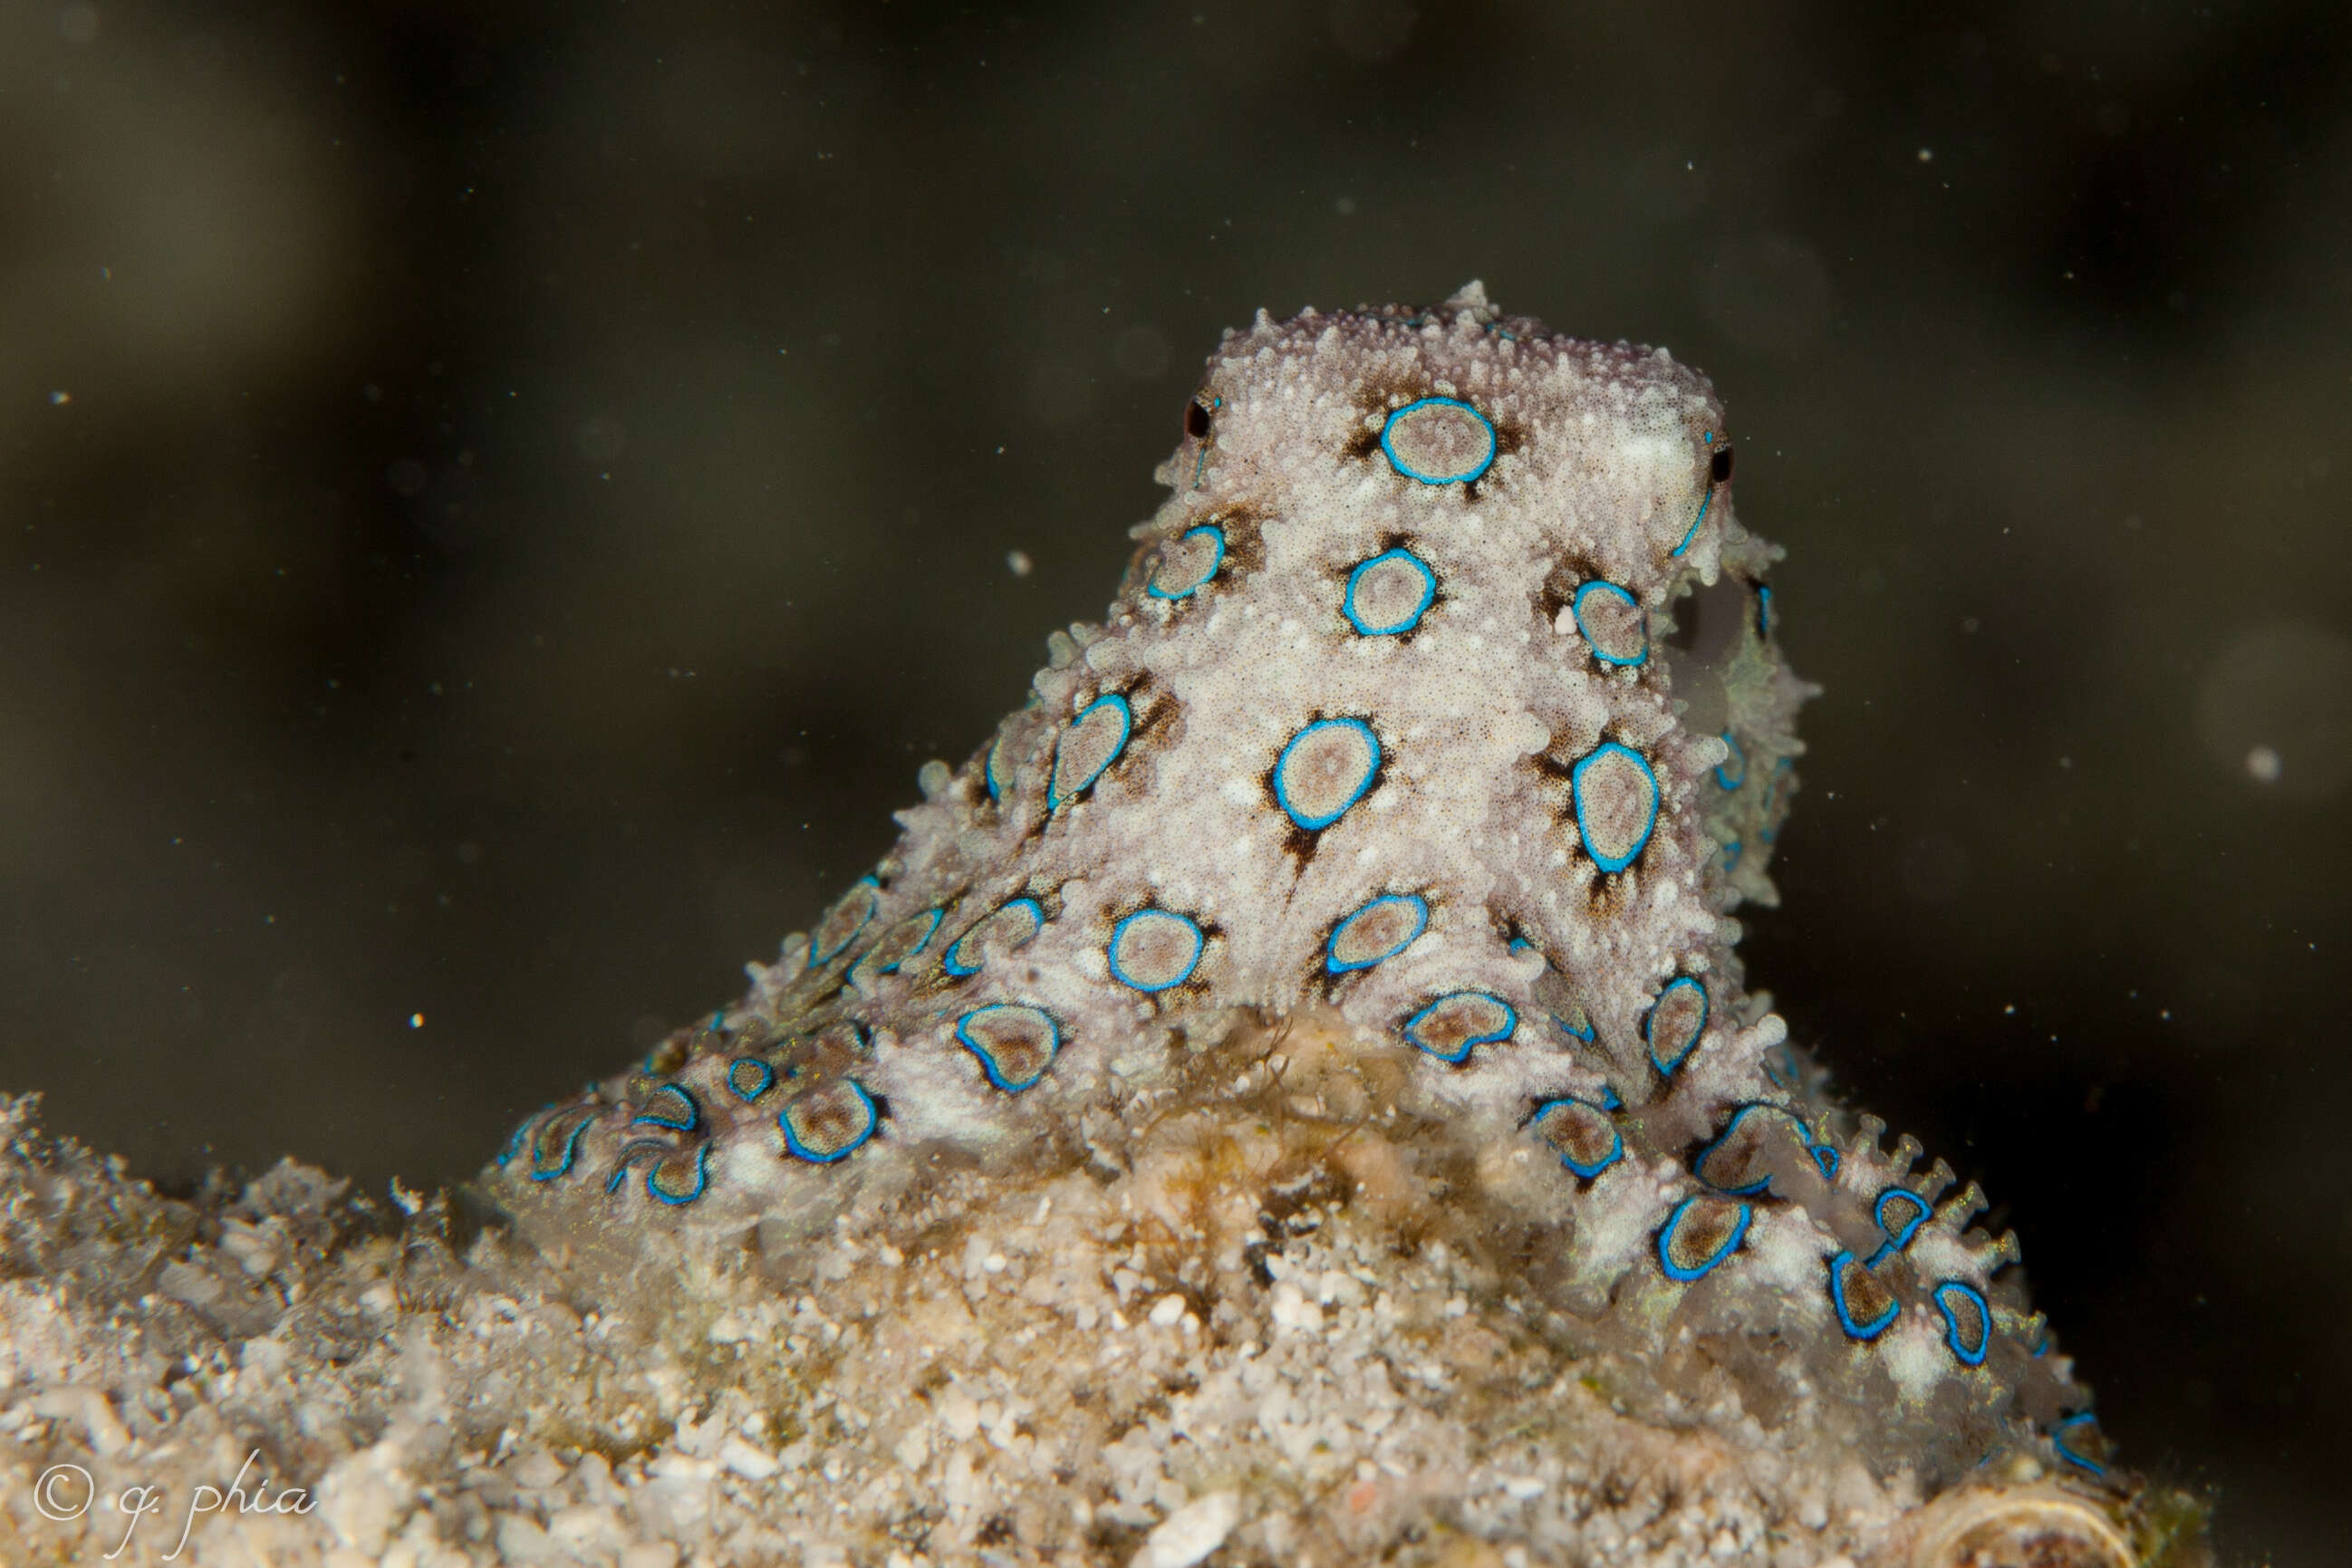 Image of Greater Blue-ringed Octopus